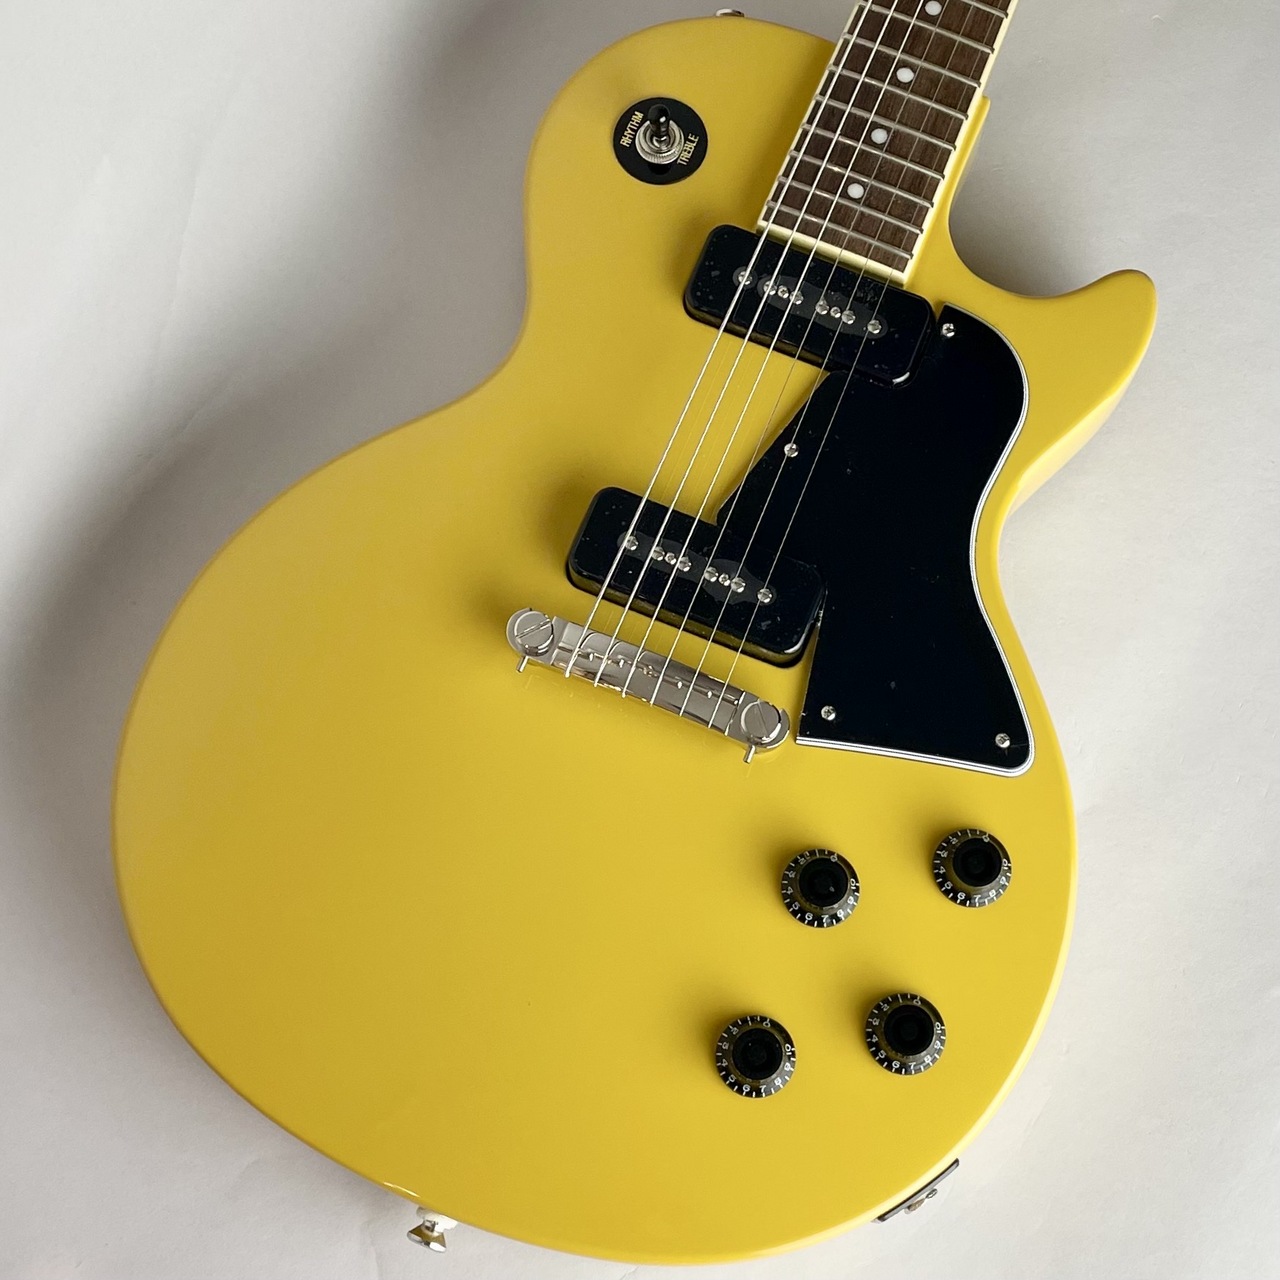 Epiphone Les Paul Special TV Yellow エピフォン レスポール